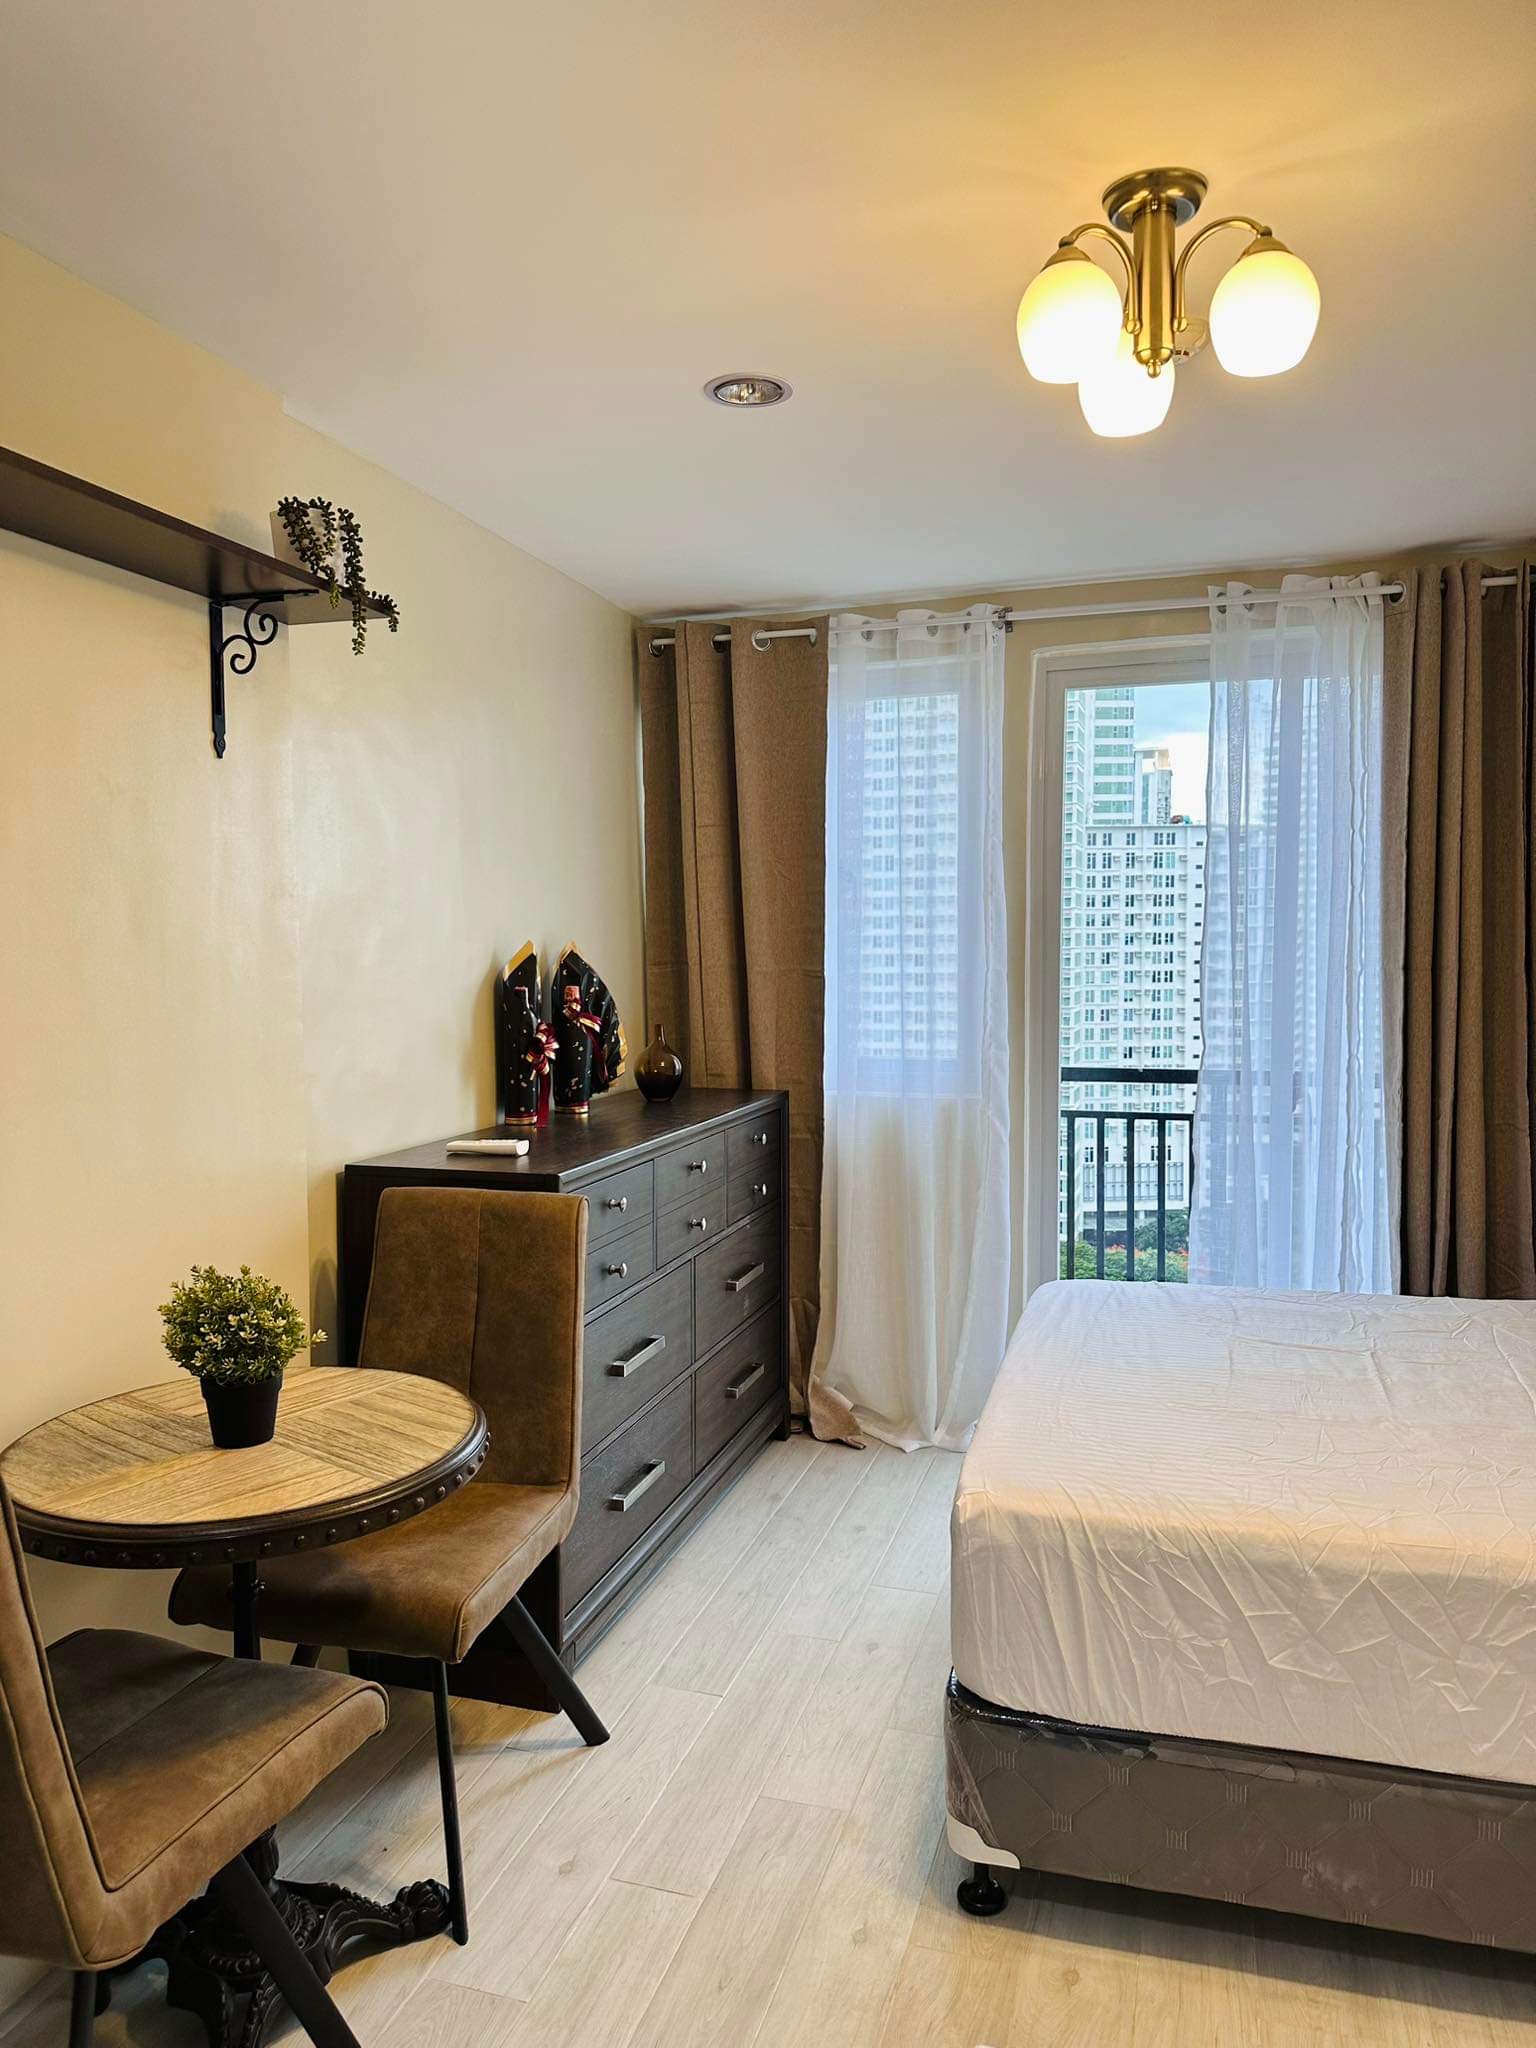 furnished-studio-in-cityscaped-grand-tower-archbishop-reyes-cebu-city